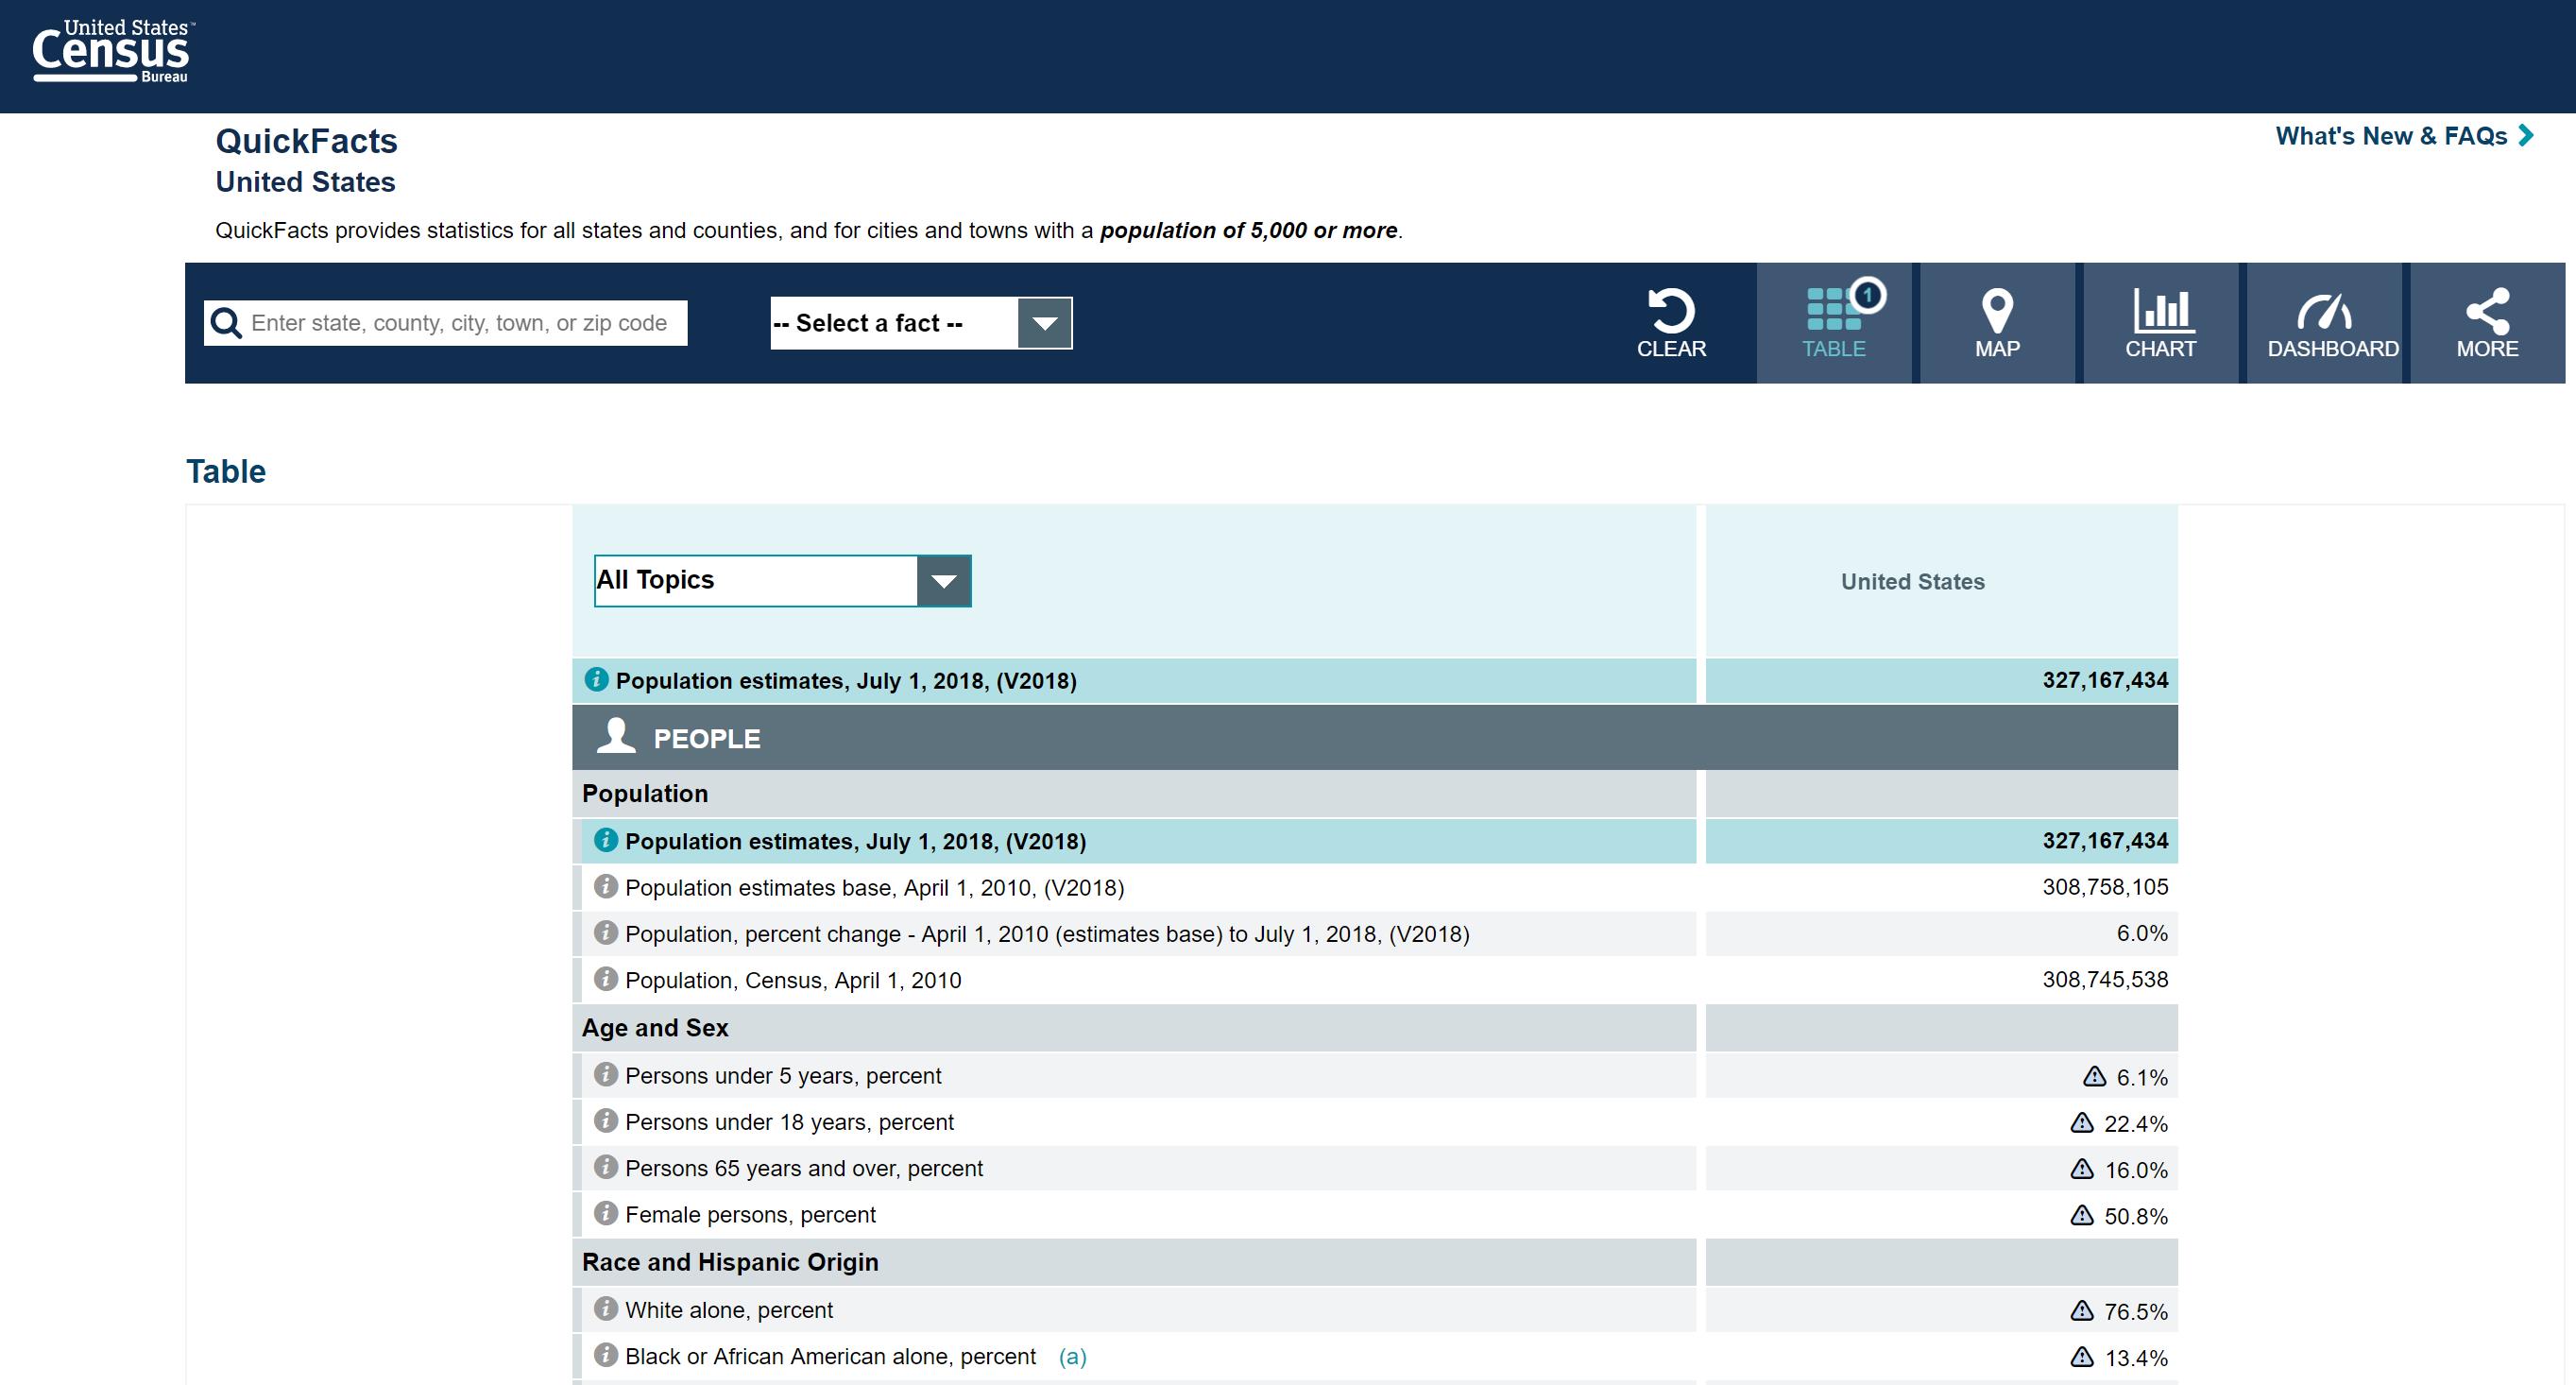 Screenshot of the U.S. Census Bureau QuickFacts main page. There is a search bar on the left and a filter on its right. And more options are available on the right. A default table is shown below.